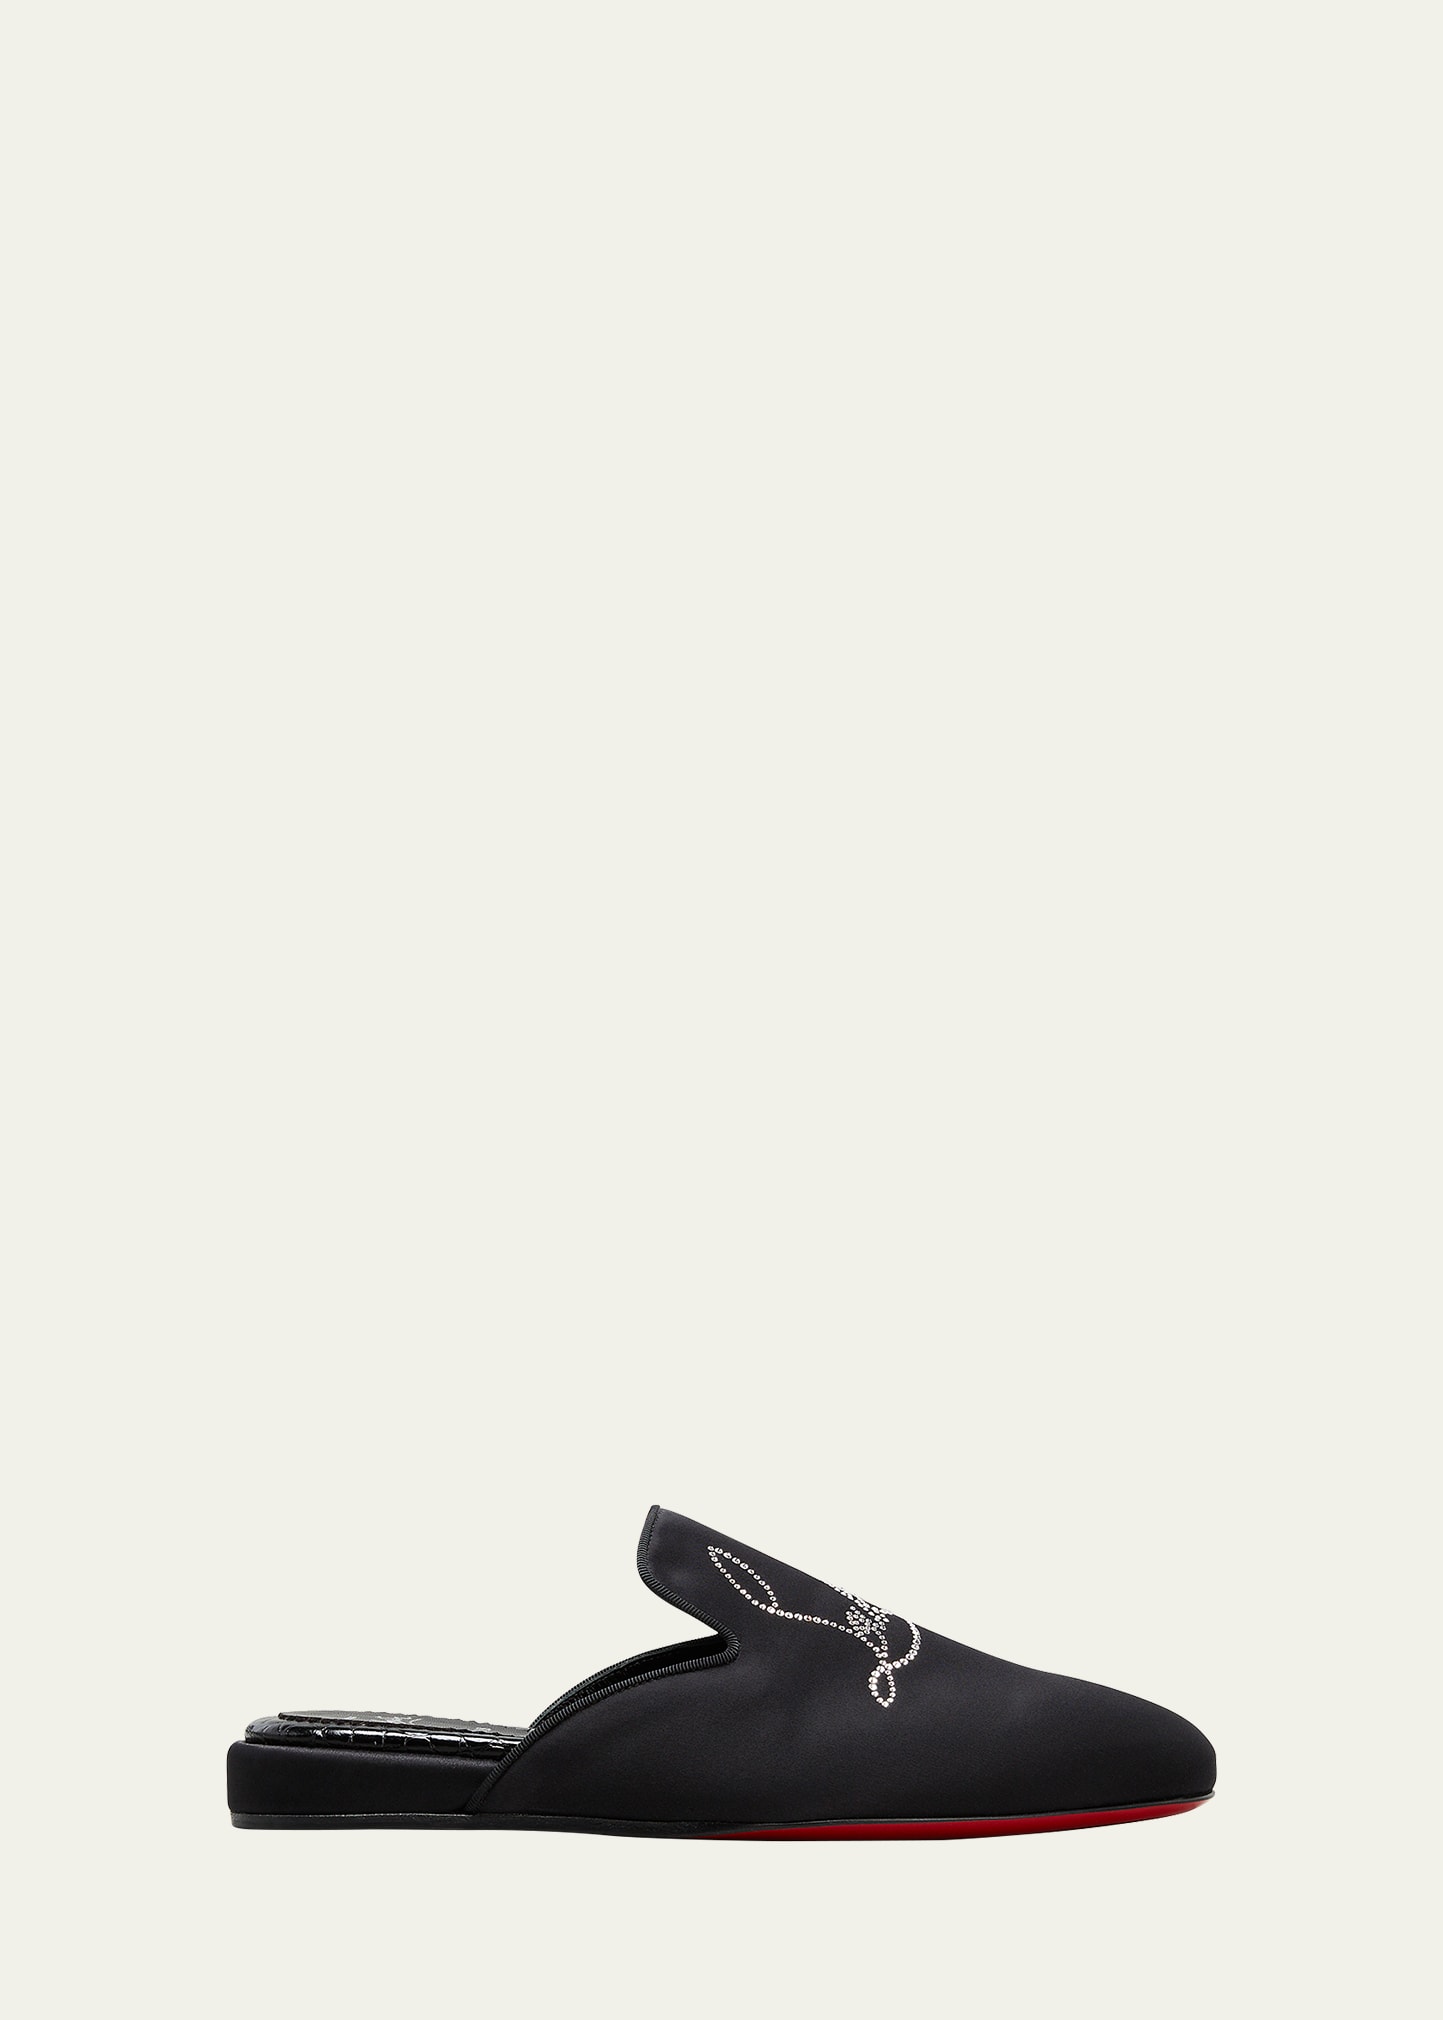 Christian Louboutin Coolito Silk Script Loafer Mules